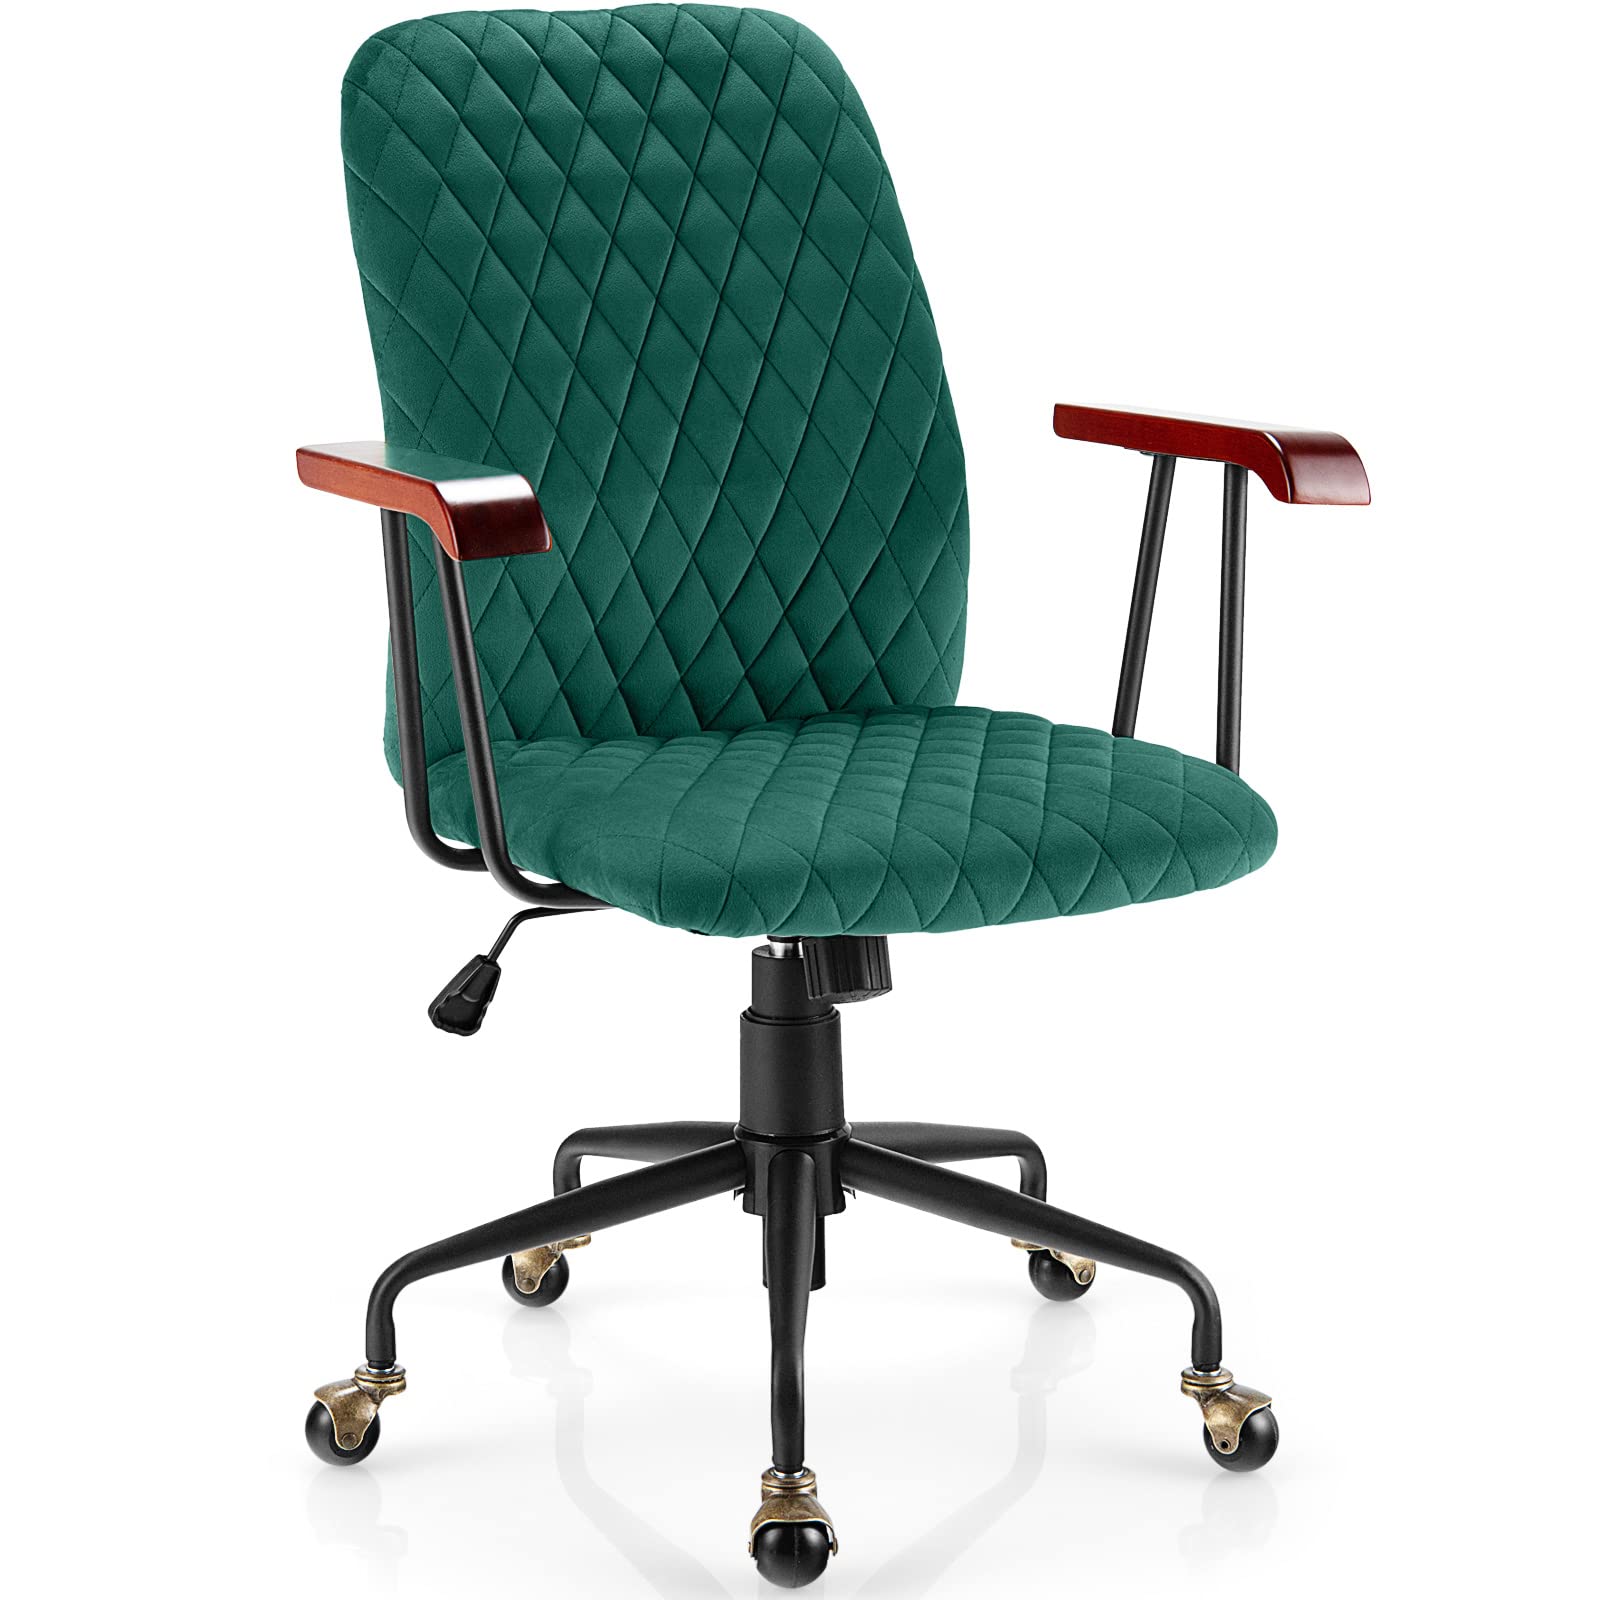 5 Top Swivel Task Chairs for Your Office: Find Comfort and Style